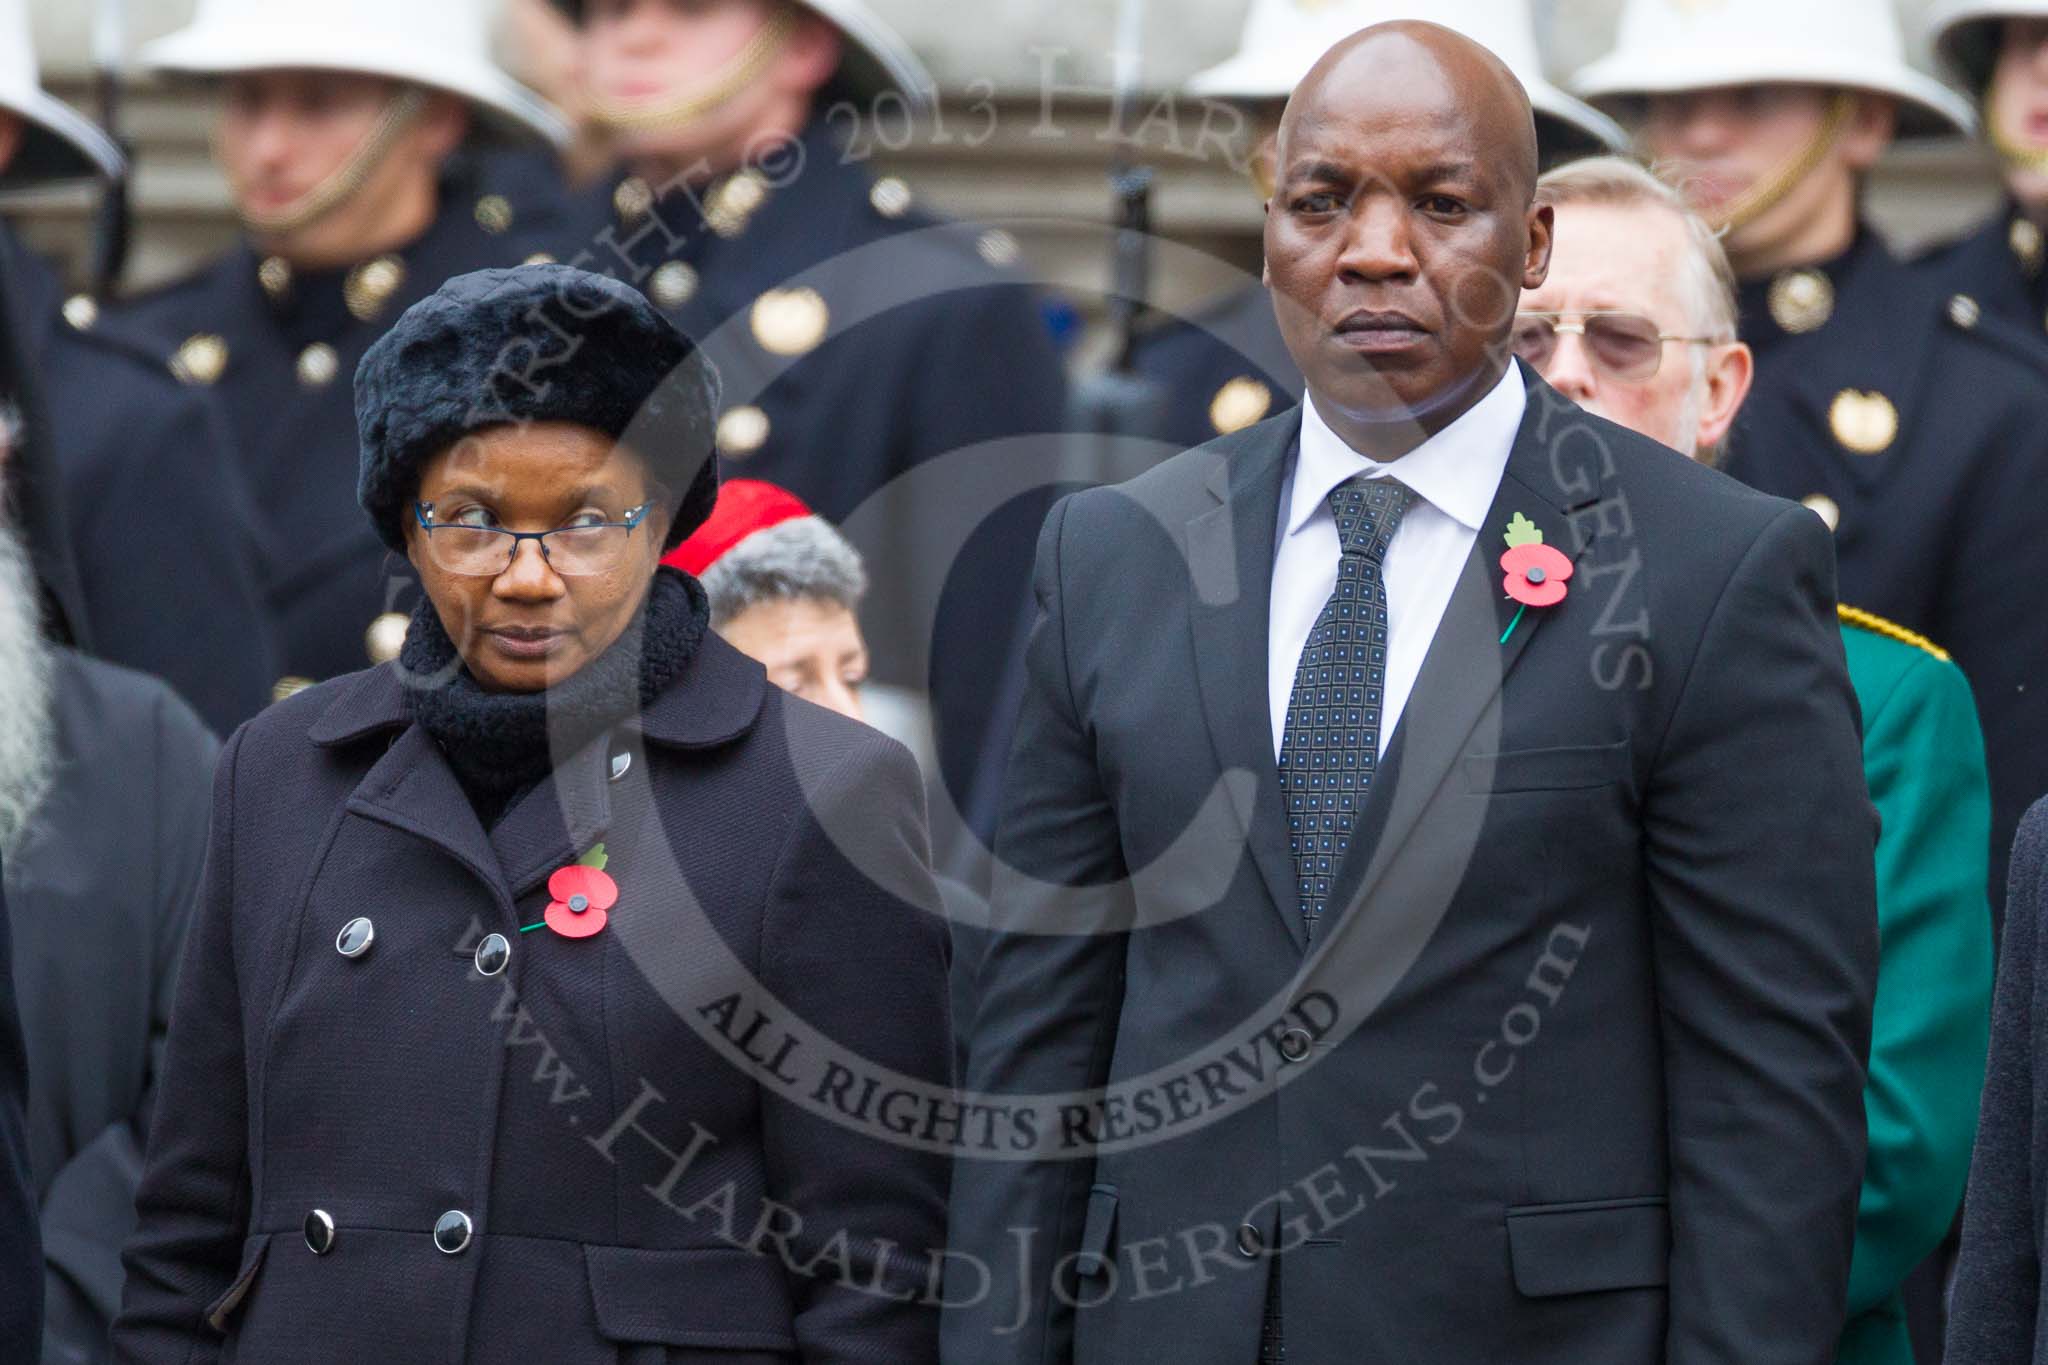 Remembrance Sunday at the Cenotaph 2015: The Minister Counsellor of Jamaica and the High Commissioner of Tanzania standing at the Cenotaph. Image #313, 08 November 2015 11:19 Whitehall, London, UK